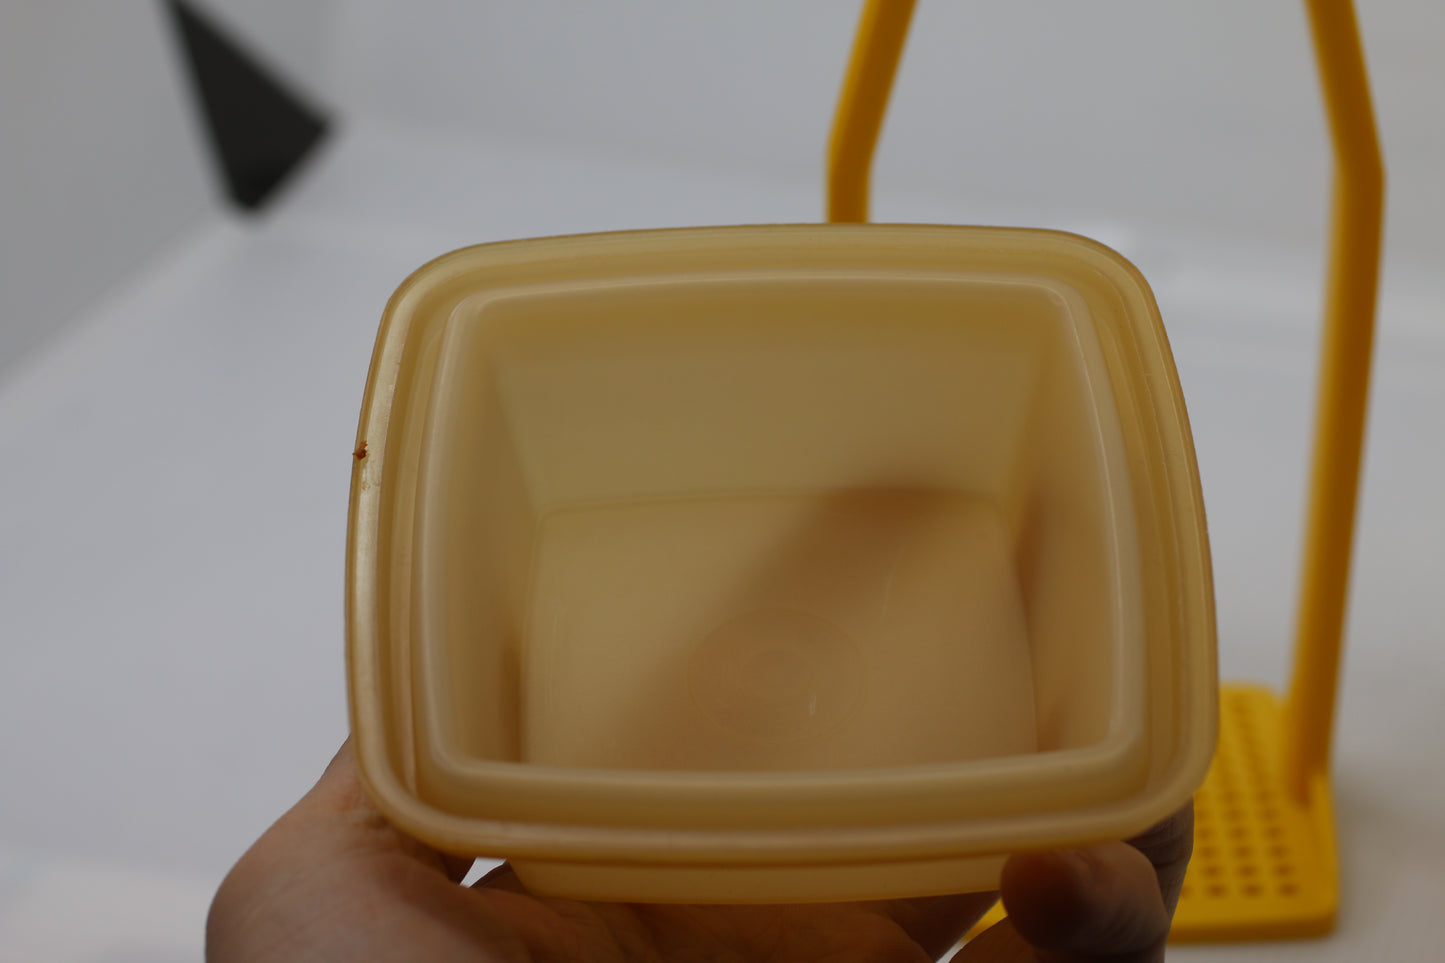 Tupperware Pickle Keeper Mustard Yellow With Lid And Matching Lifter, #1330-2